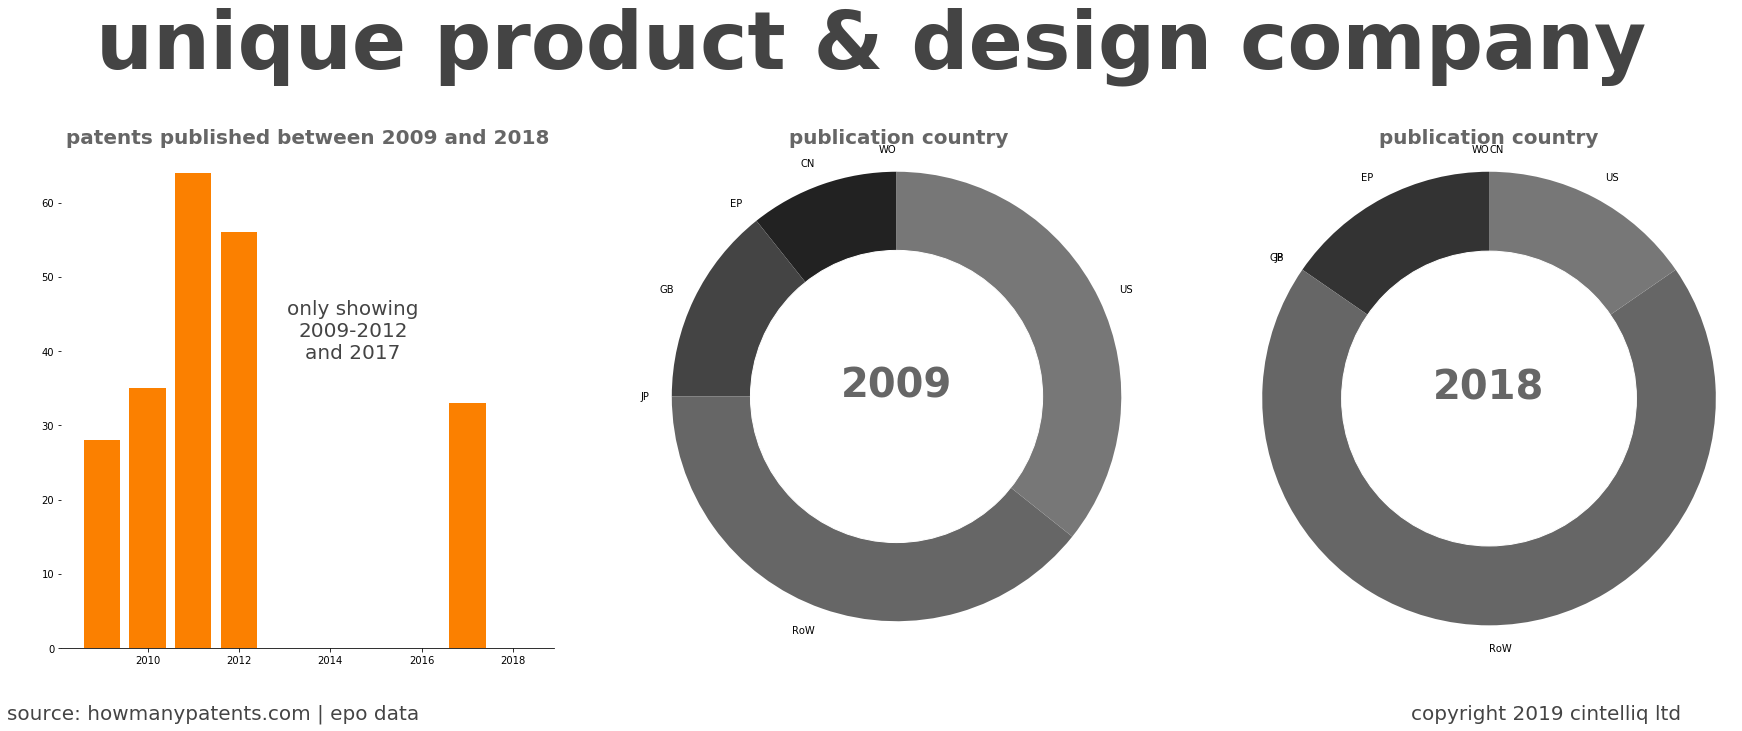 summary of patents for Unique Product & Design Company